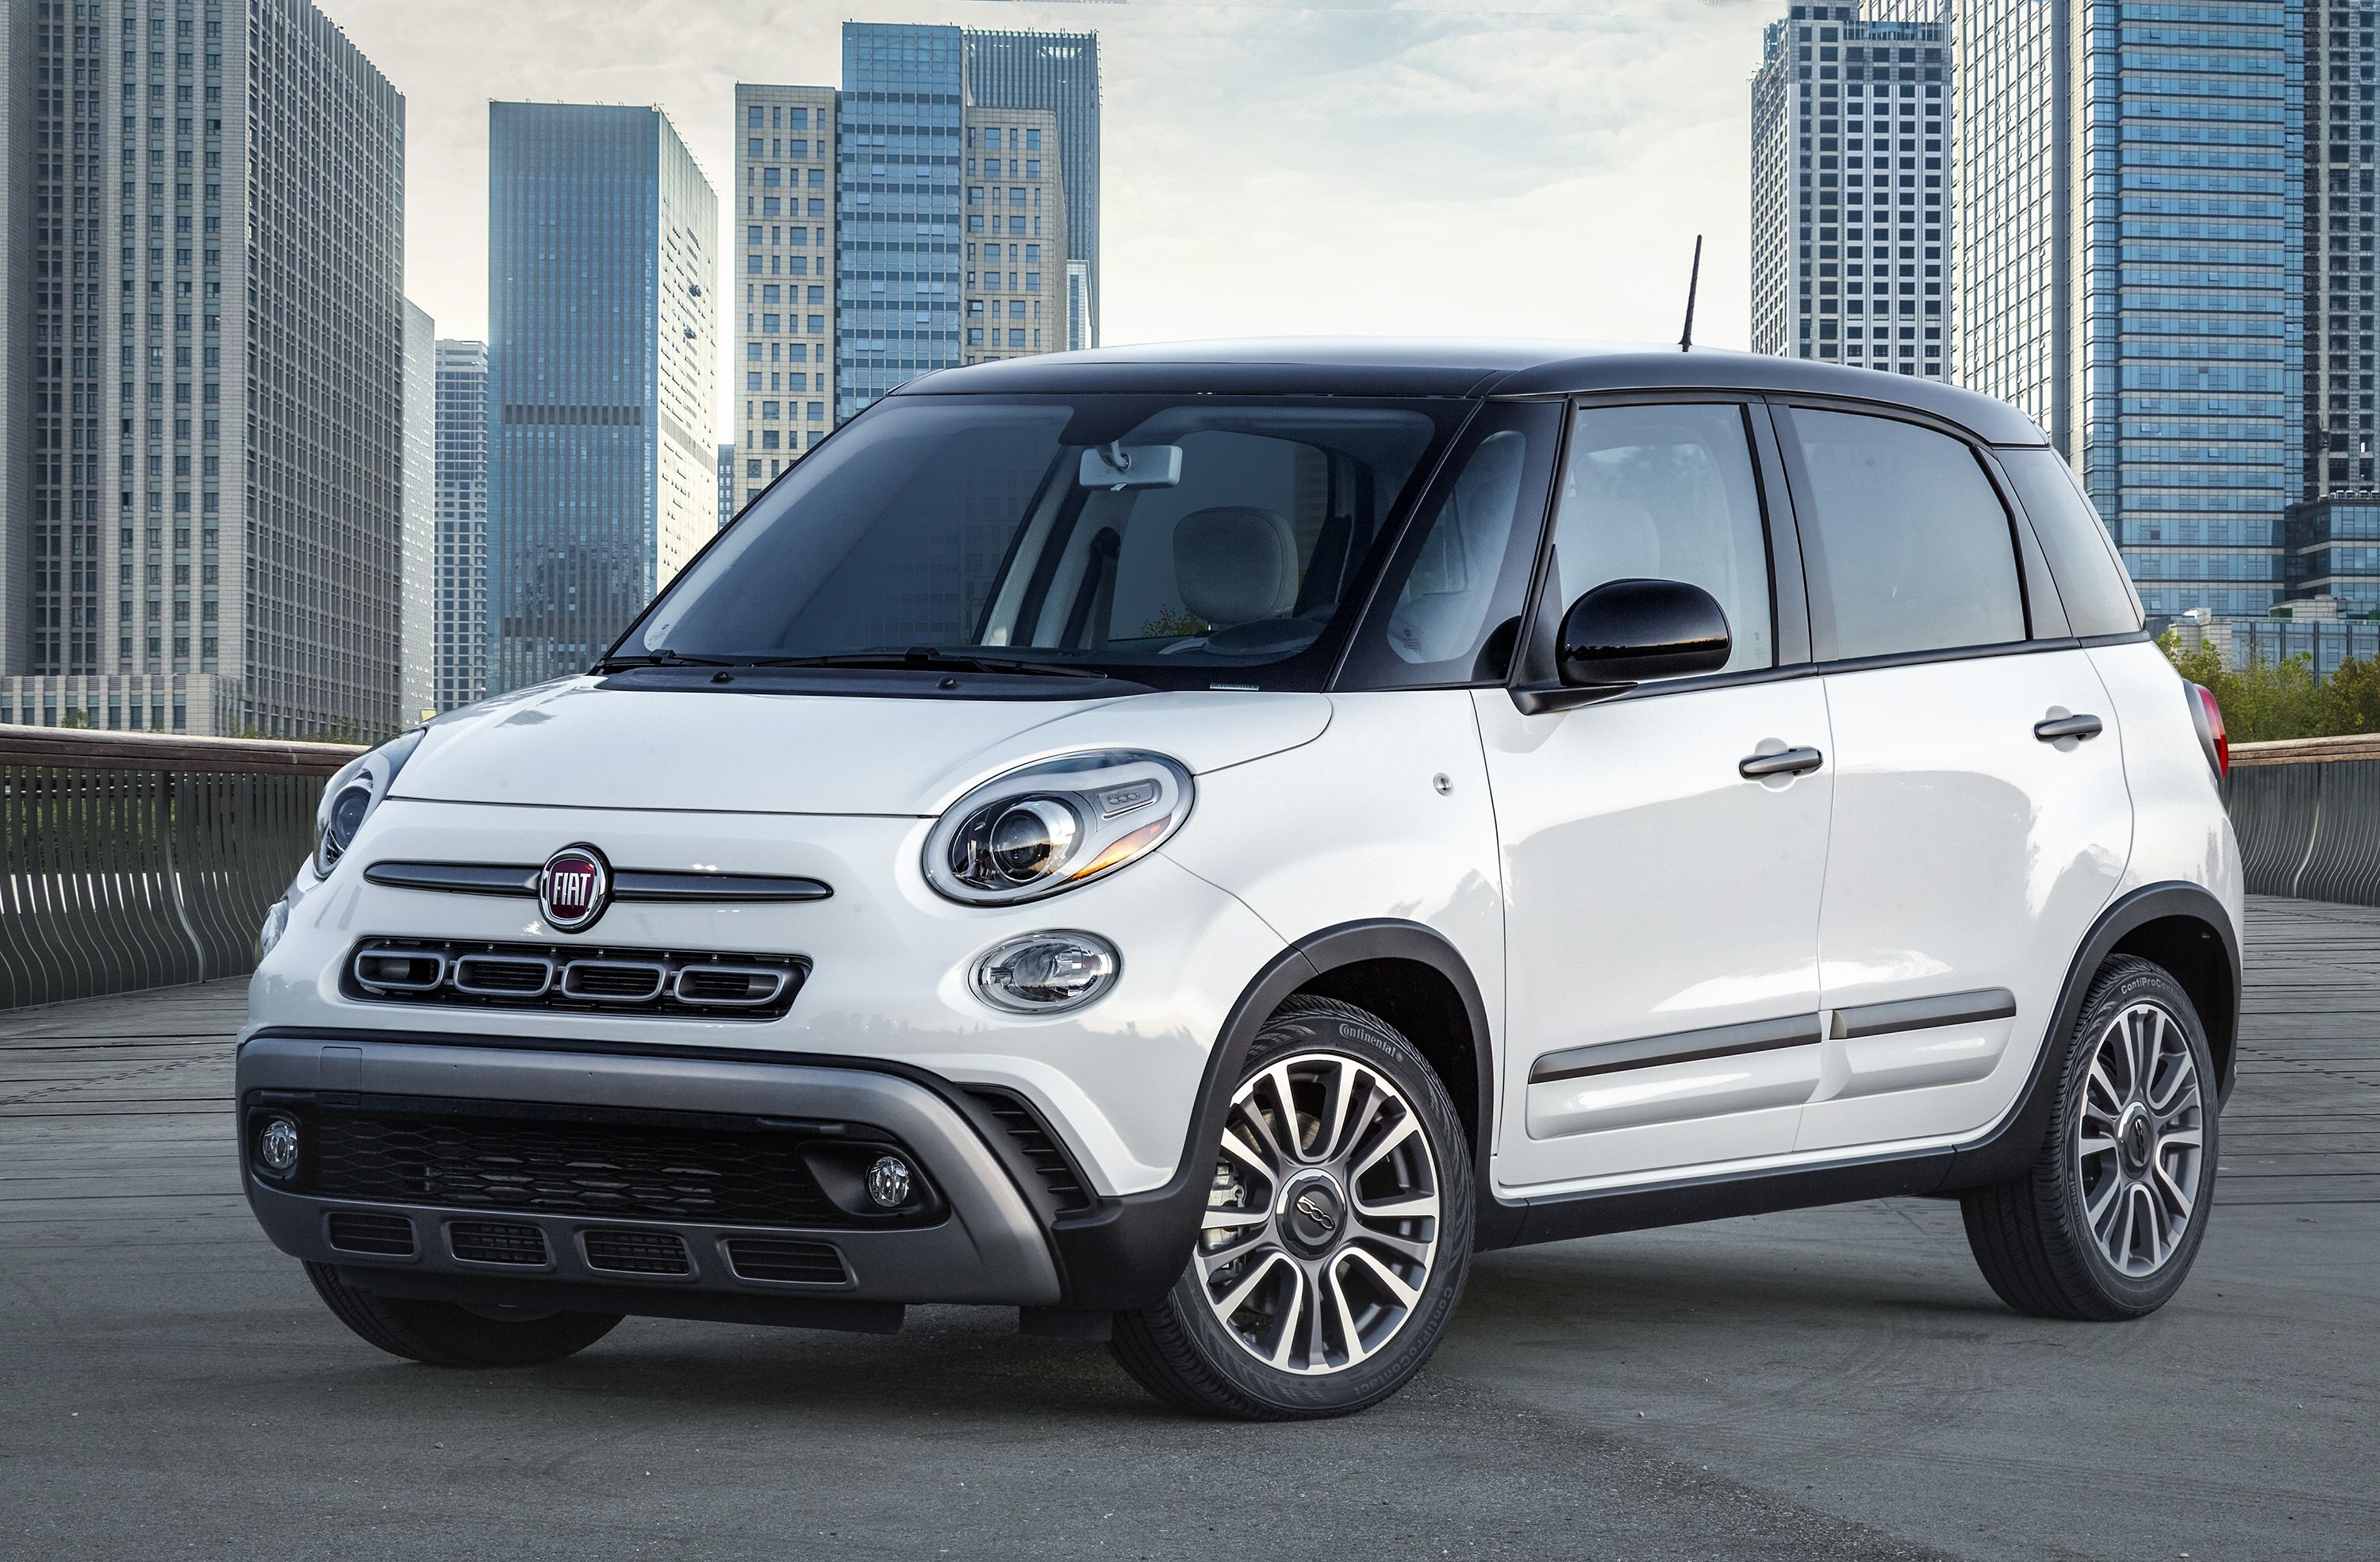 Fiat 500L review - Interior, design and technology 2023 | Auto Express